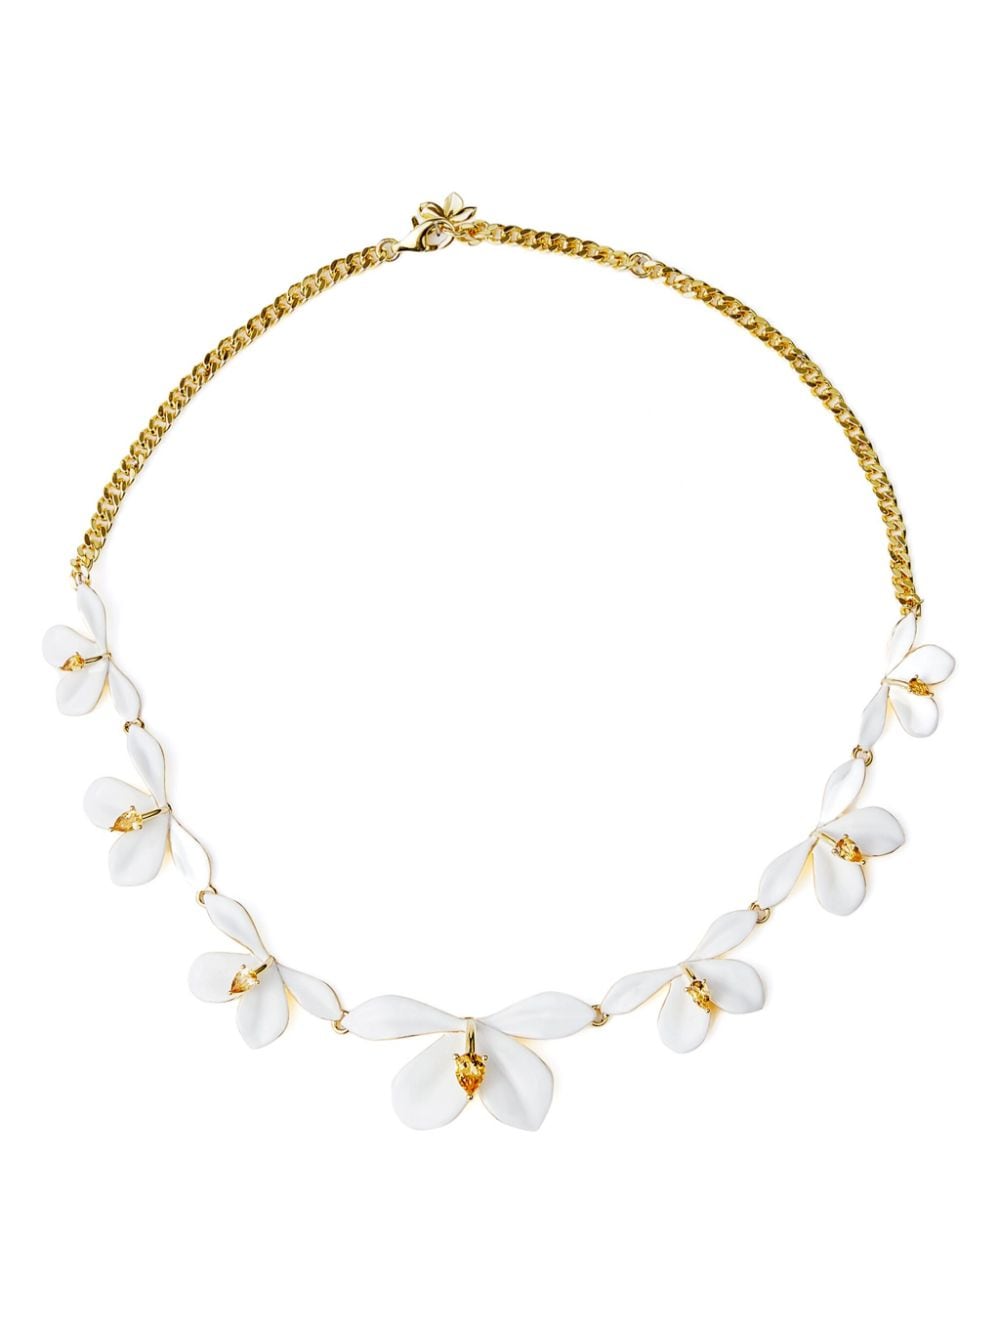 Shanghai Tang Ginger Flower Chain Necklace - Farfetch